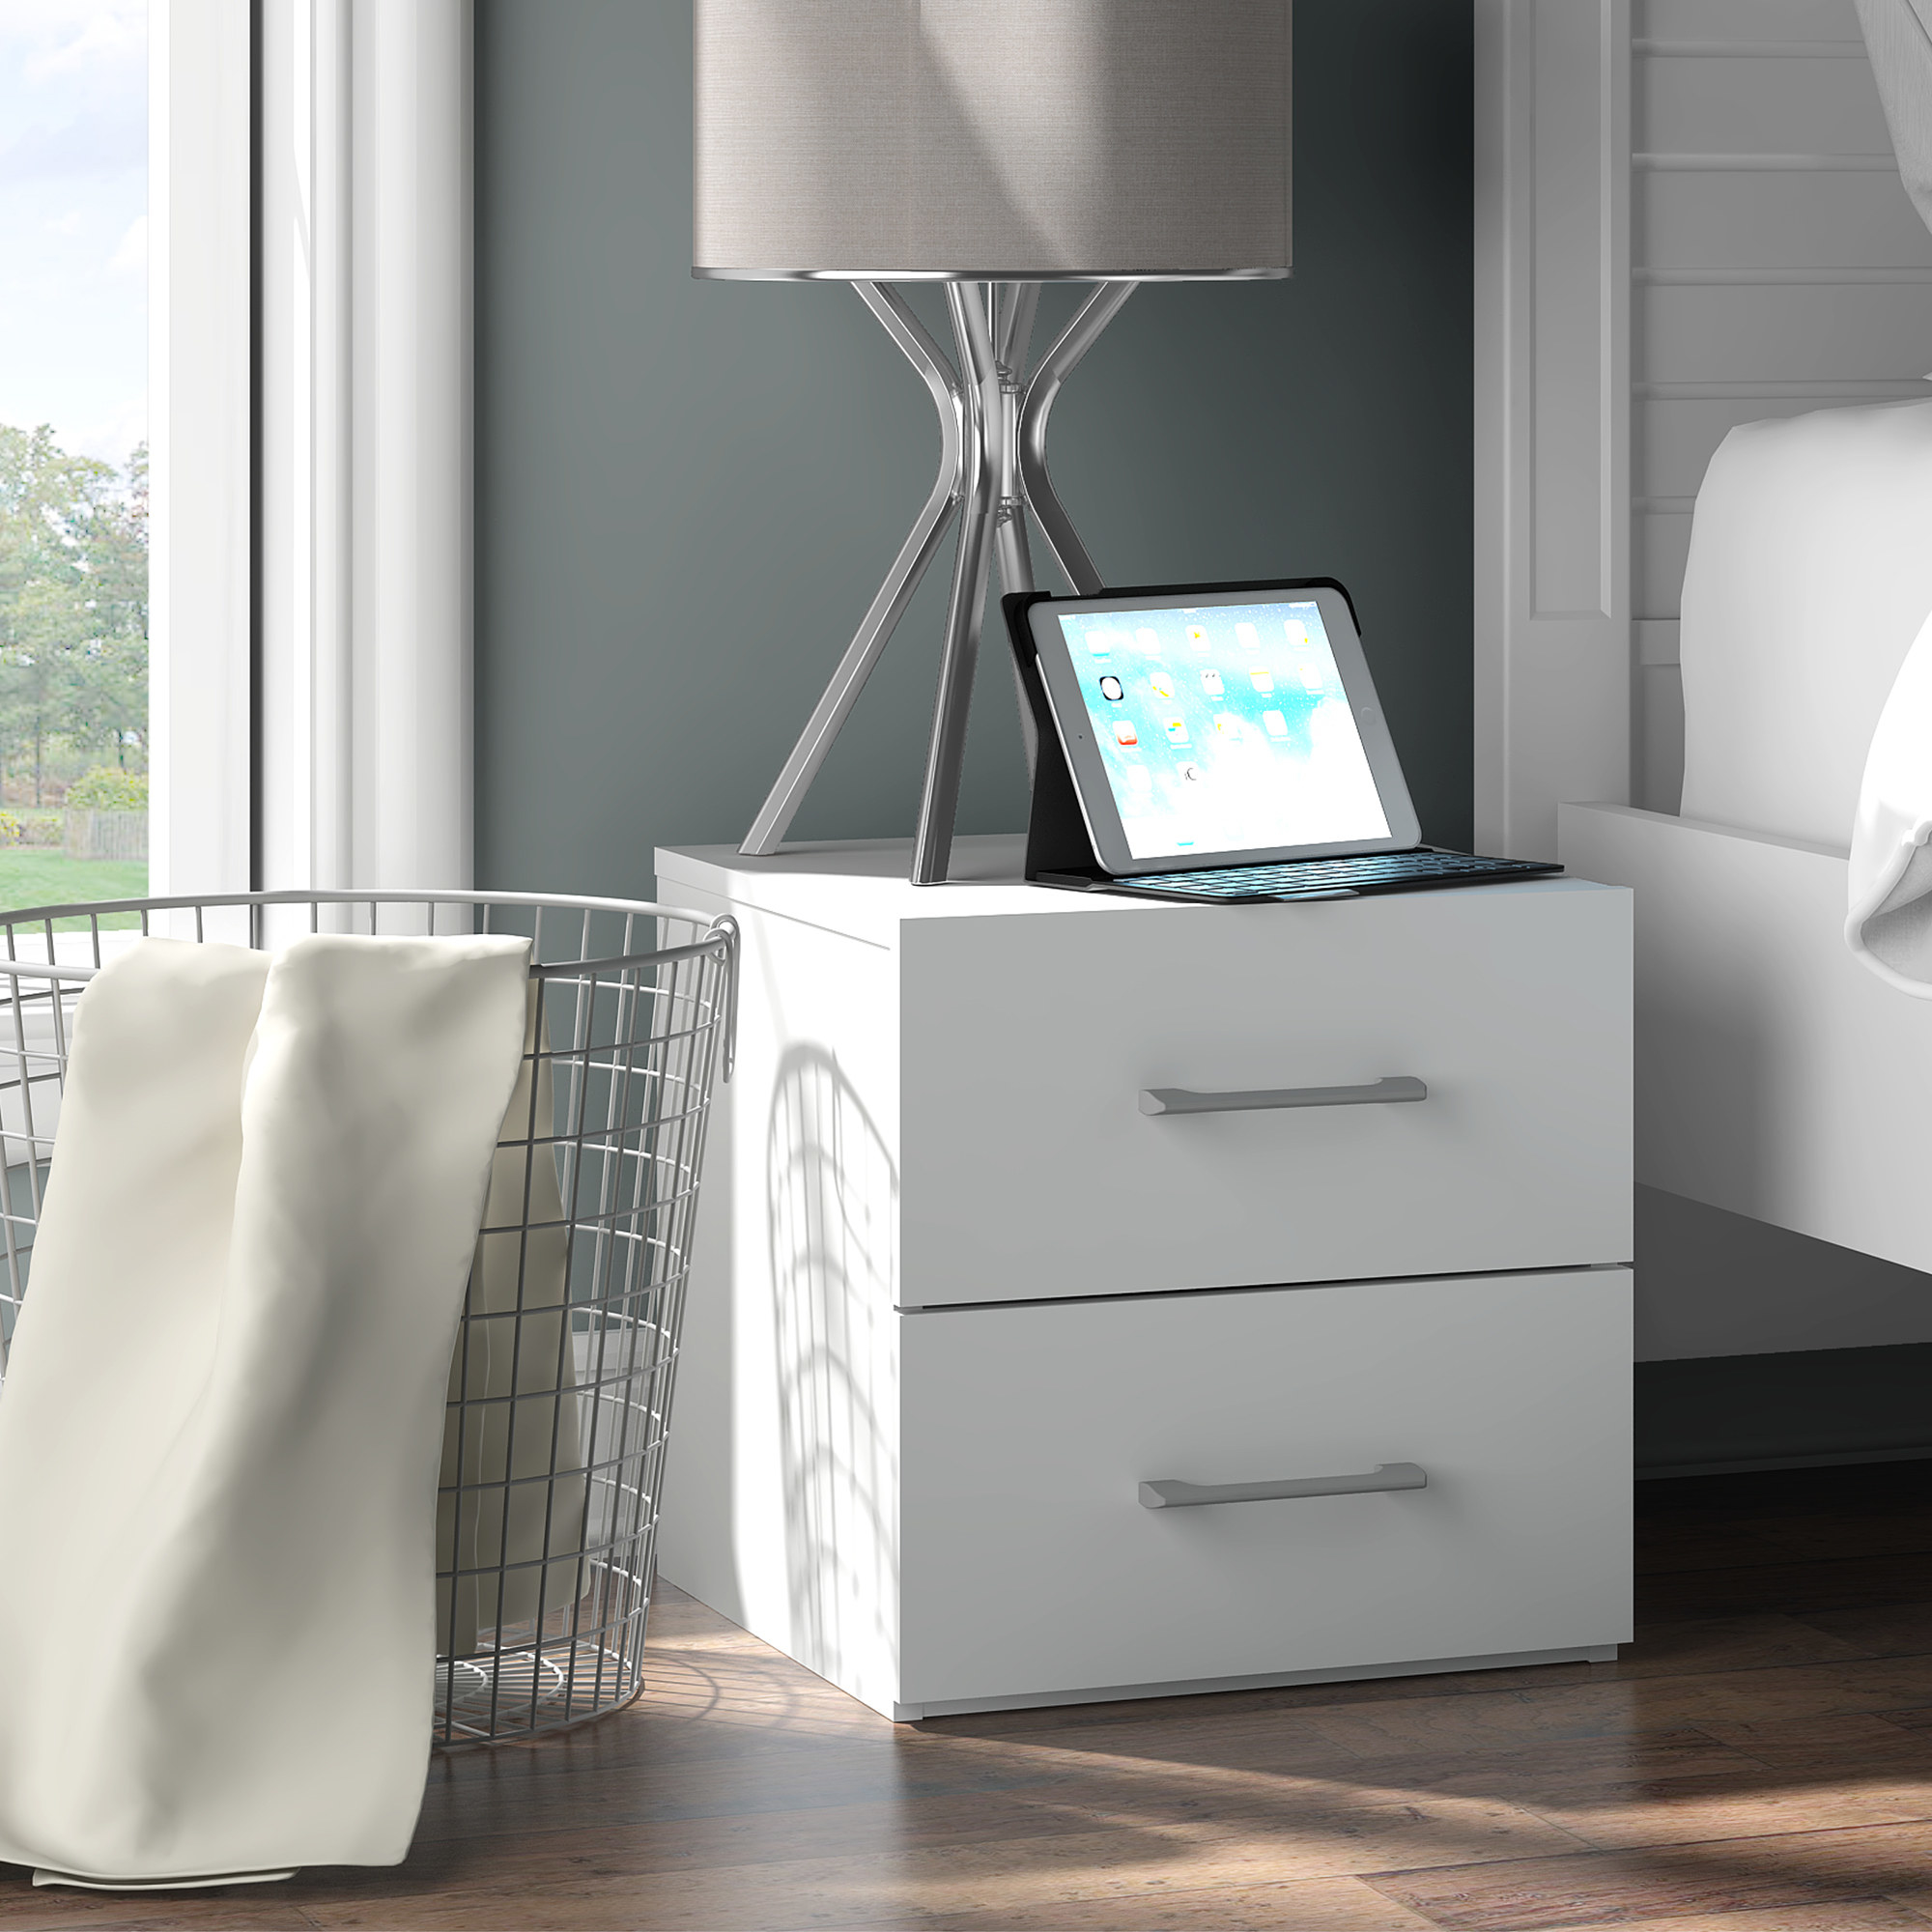 An image of a white two-drawer nightstand with a USB port